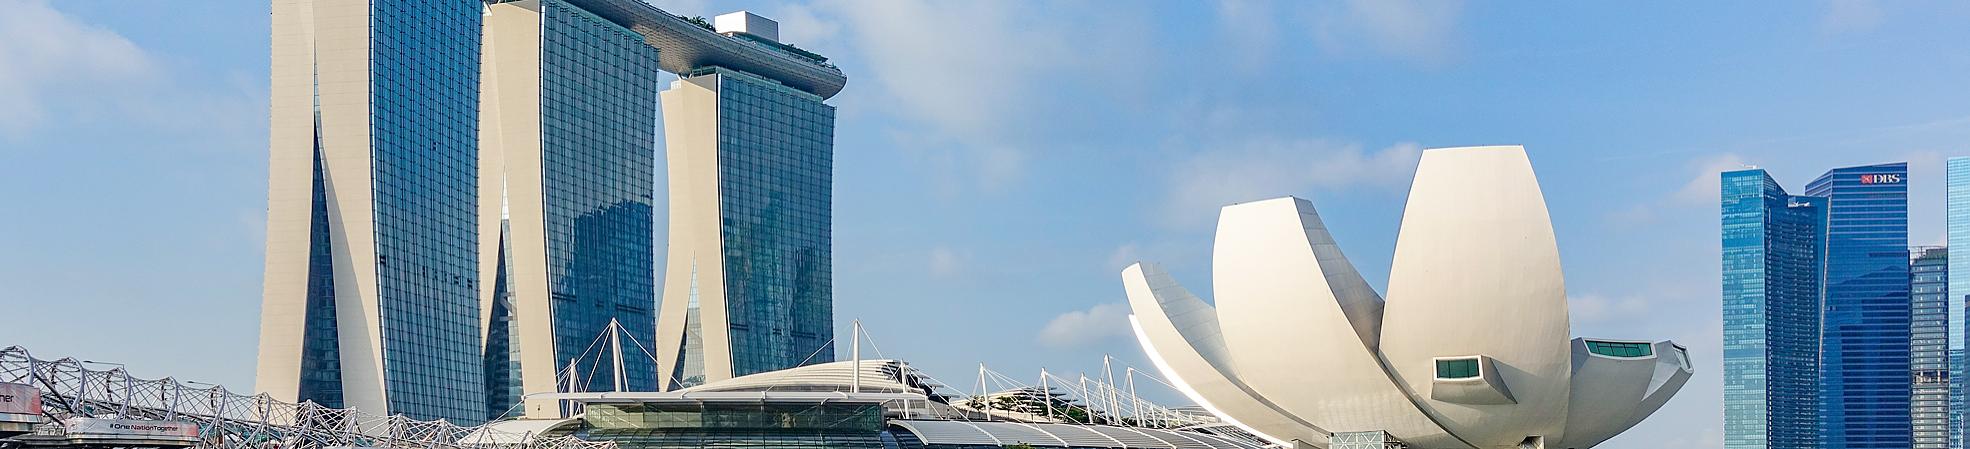 5 Top Reasons Why You Should Visit Singapore